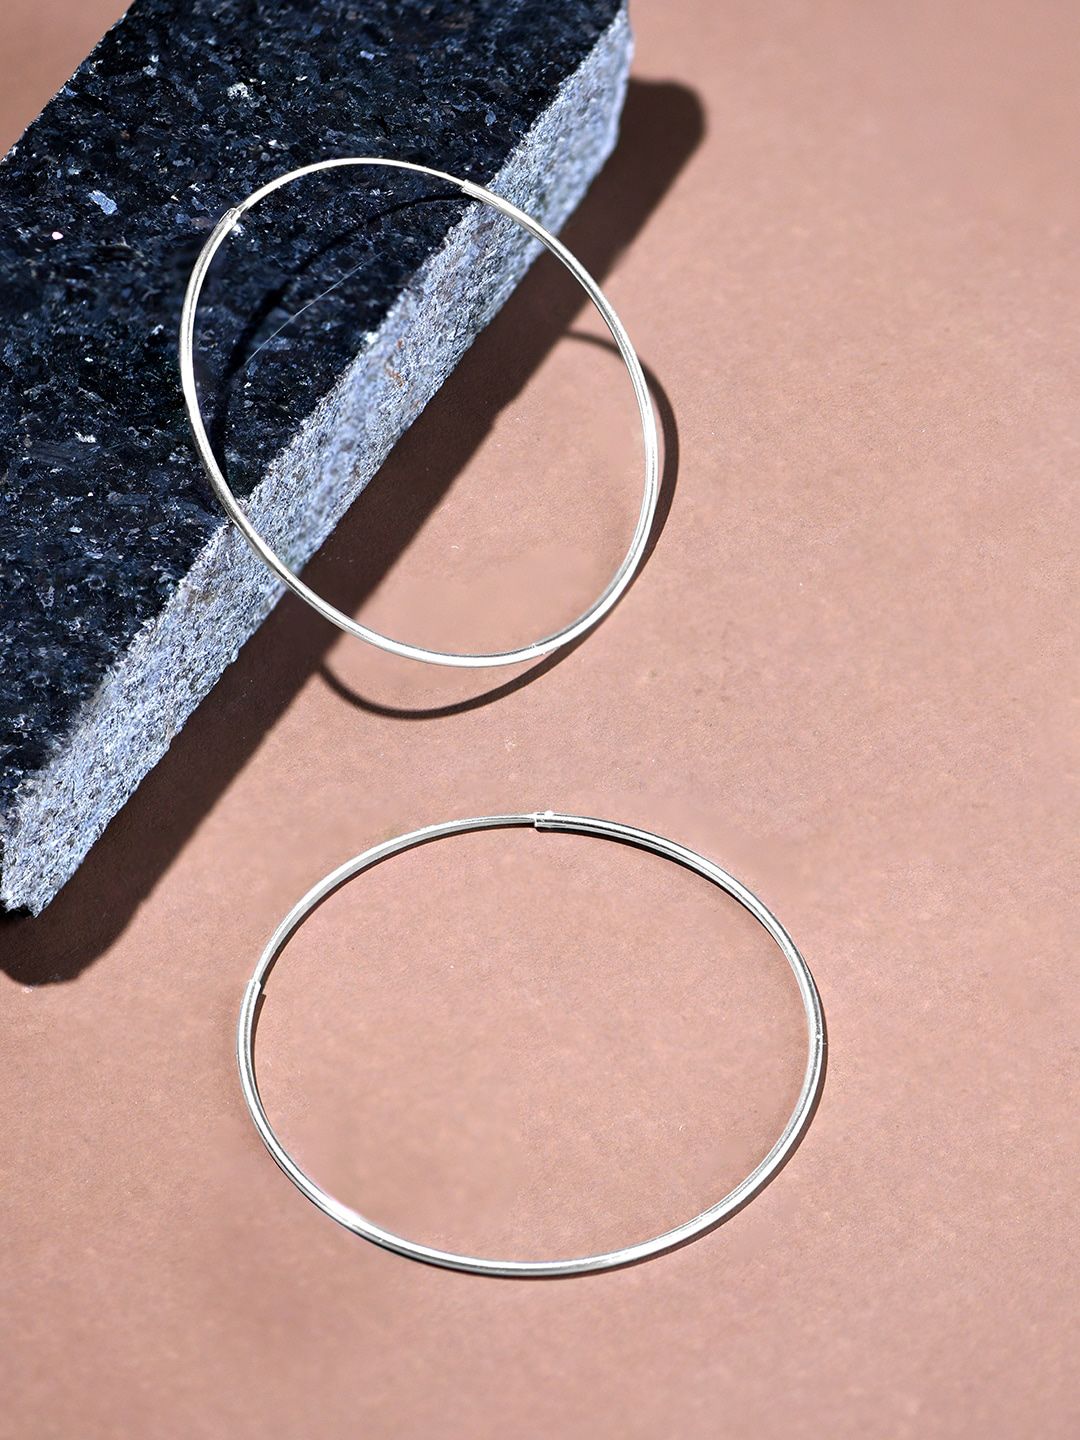 Accessorize Women 925 Pure Sterling Silver Large Simple Hoop Earrings Price in India